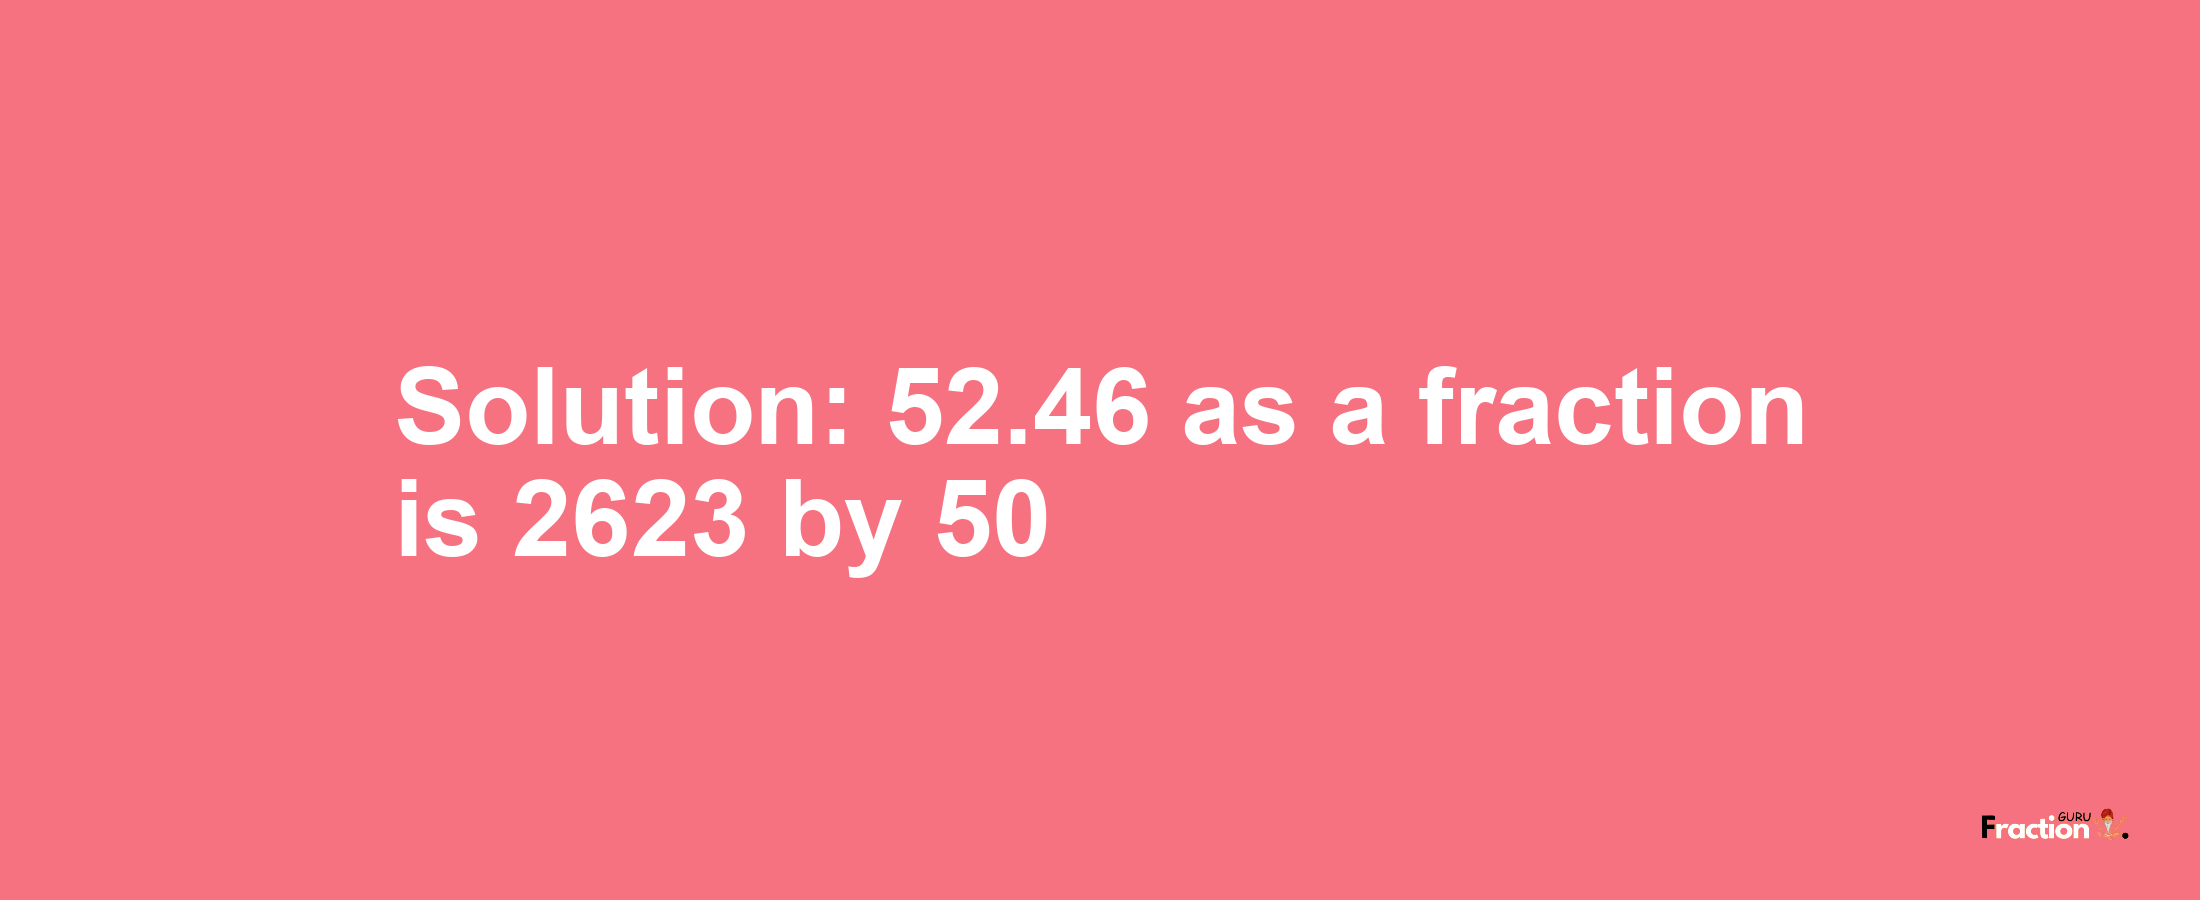 Solution:52.46 as a fraction is 2623/50